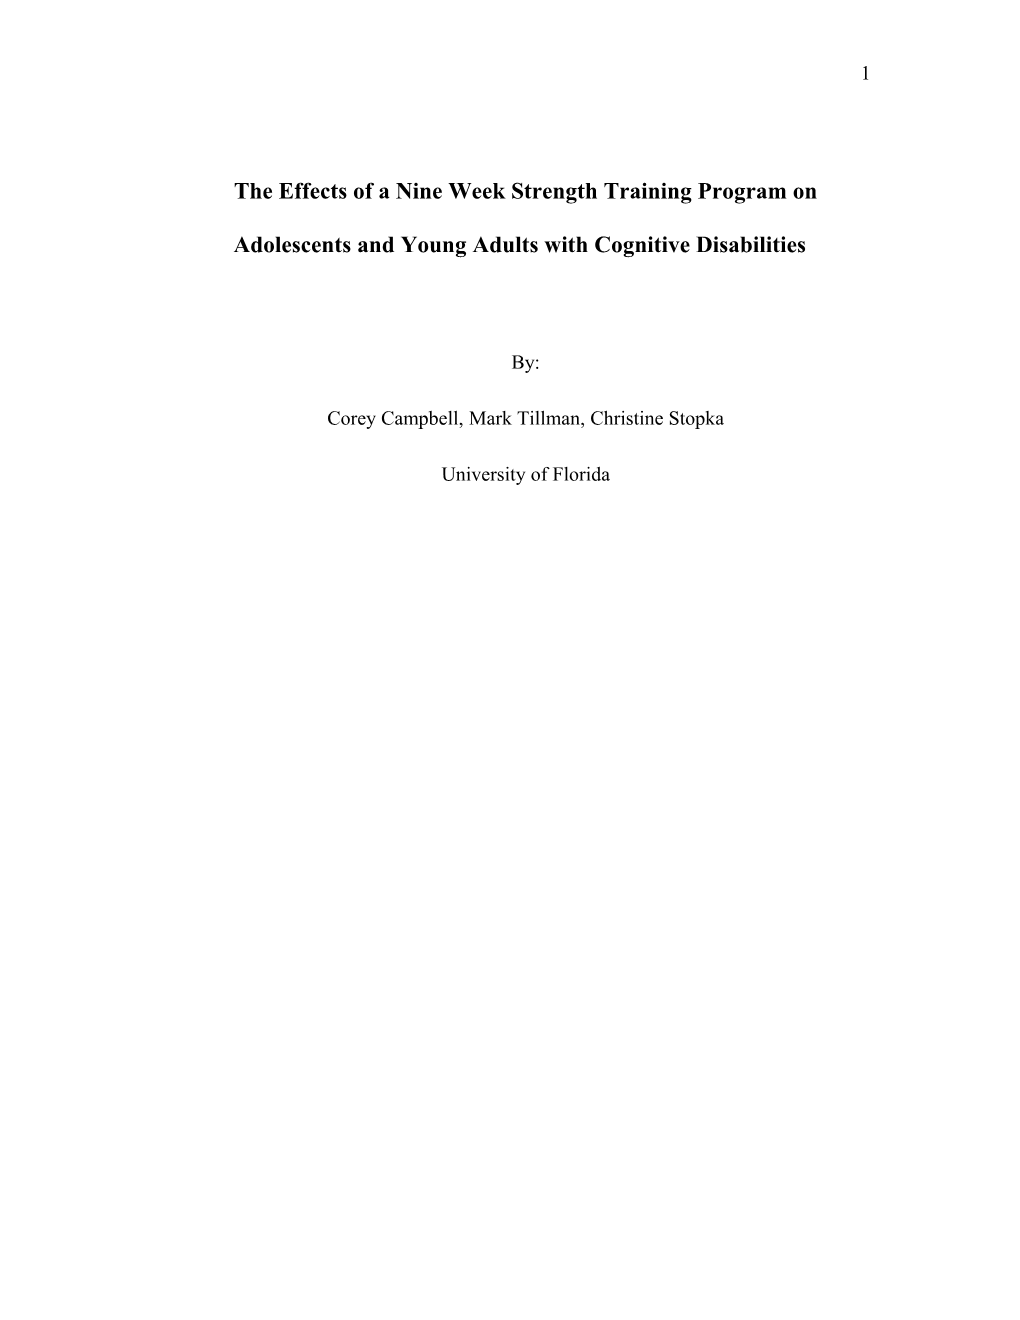 The Effects of a Nine Week Strength Training Program on Adolescents and Youth with Cognitive